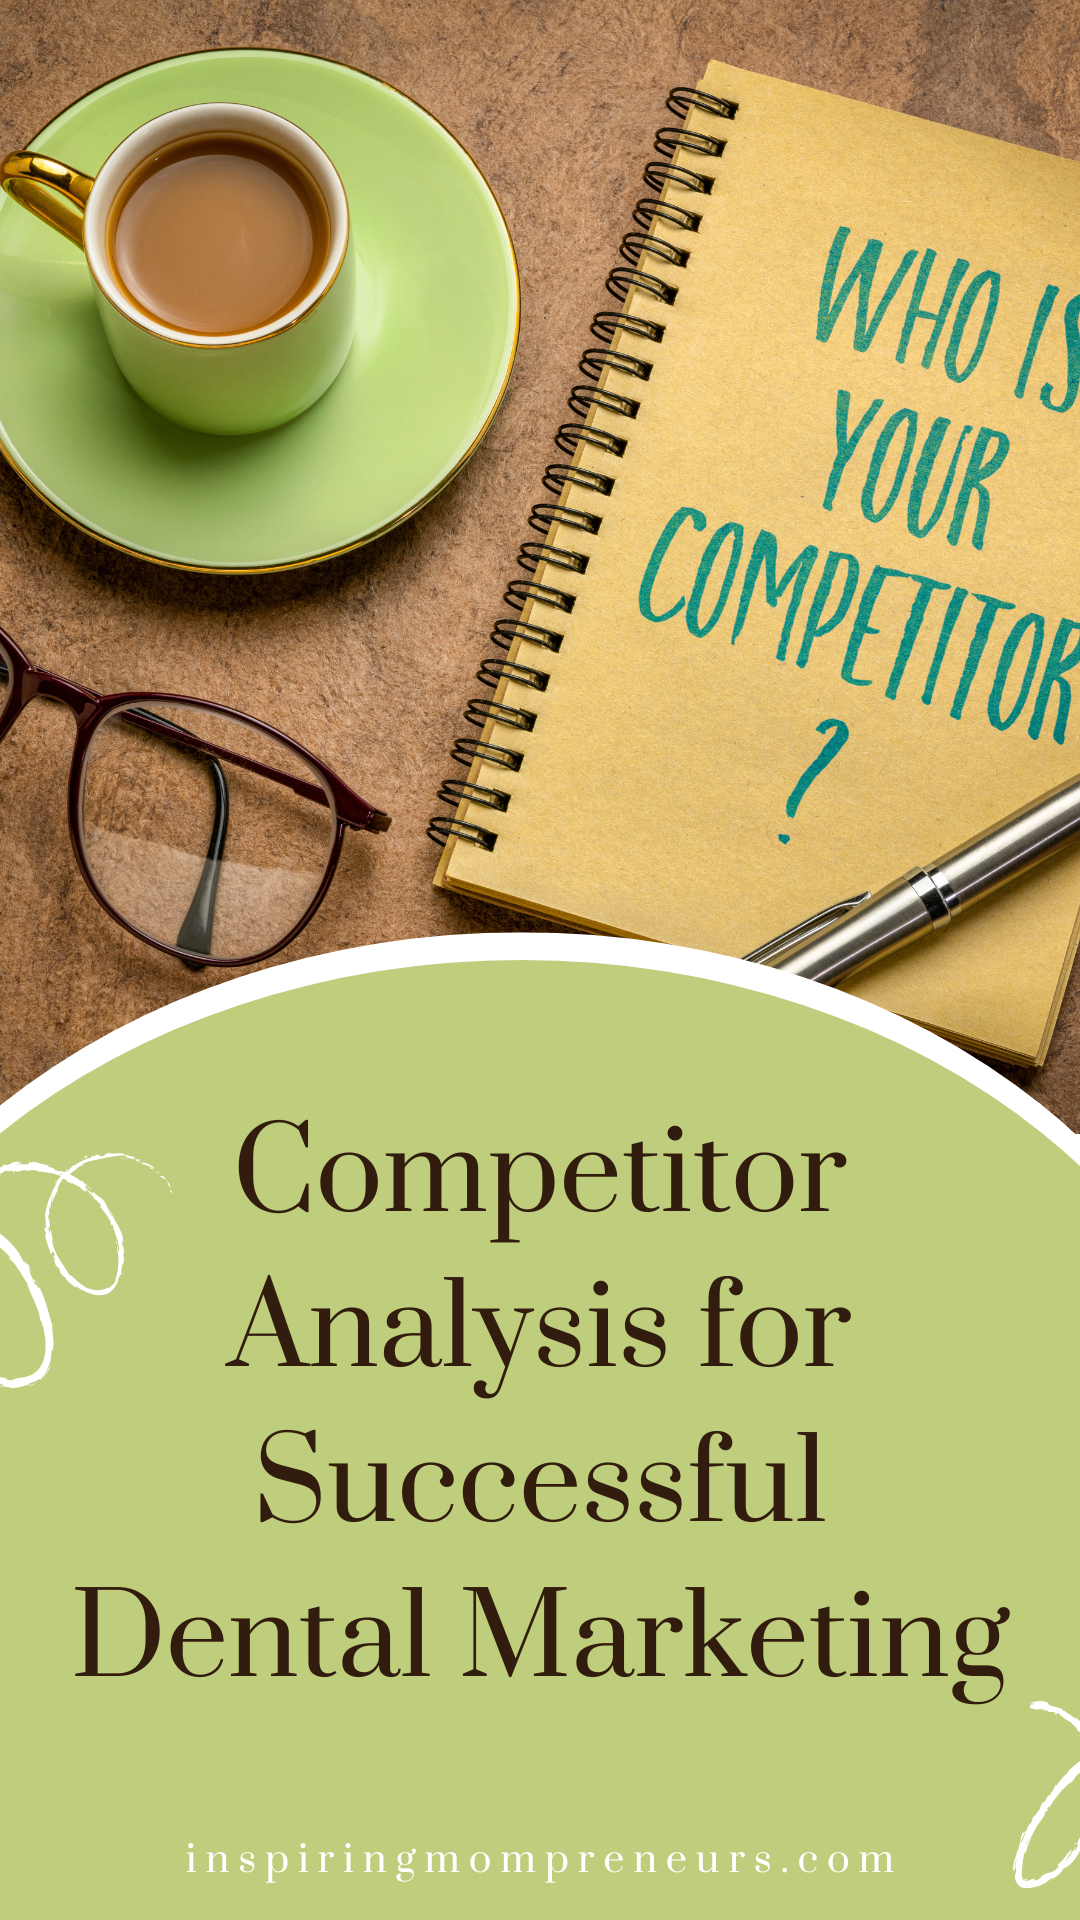 One of the most important dental marketing strategies is competitor analysis to find out which other dental practices are in your area are and what they offer.